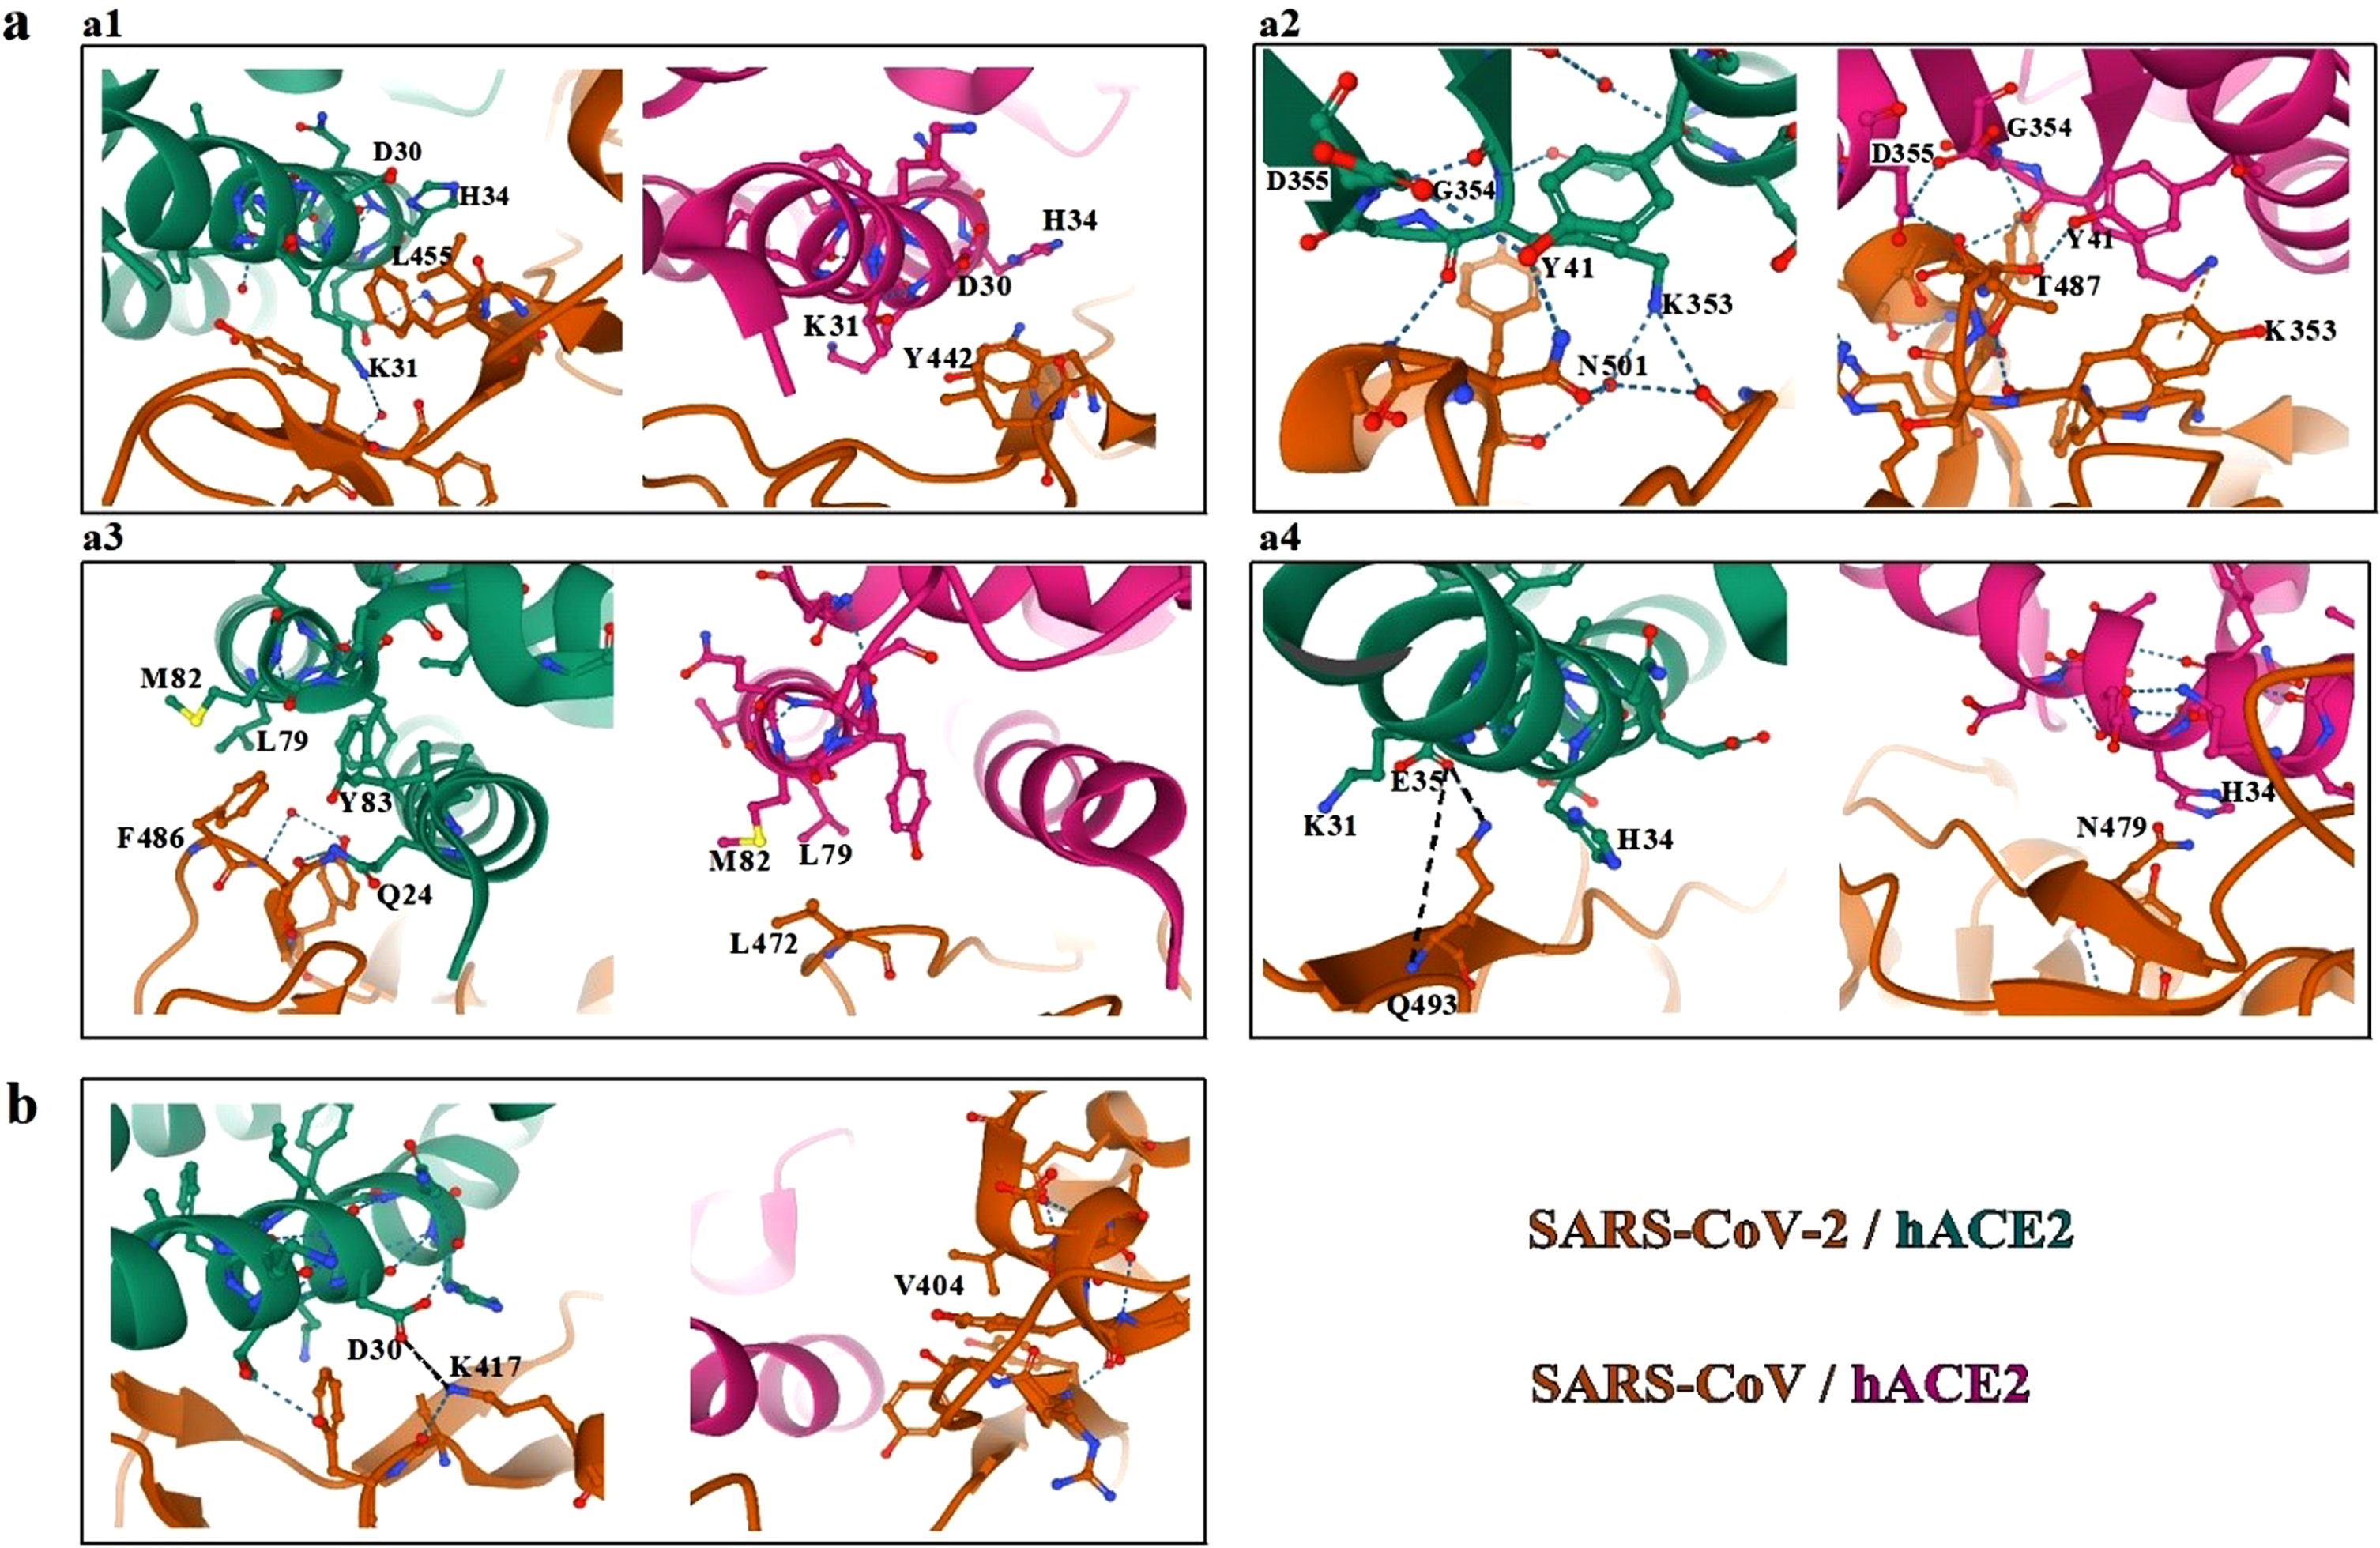 Comparison between SARS-CoV-2 and SARS-CoV binding hACE2 receptor. a. Interactions within the RBM of SARS-CoV-2 and SARS-CoV with hACE2 receptor. b. Variations in the K417/V404 position [76, 120].